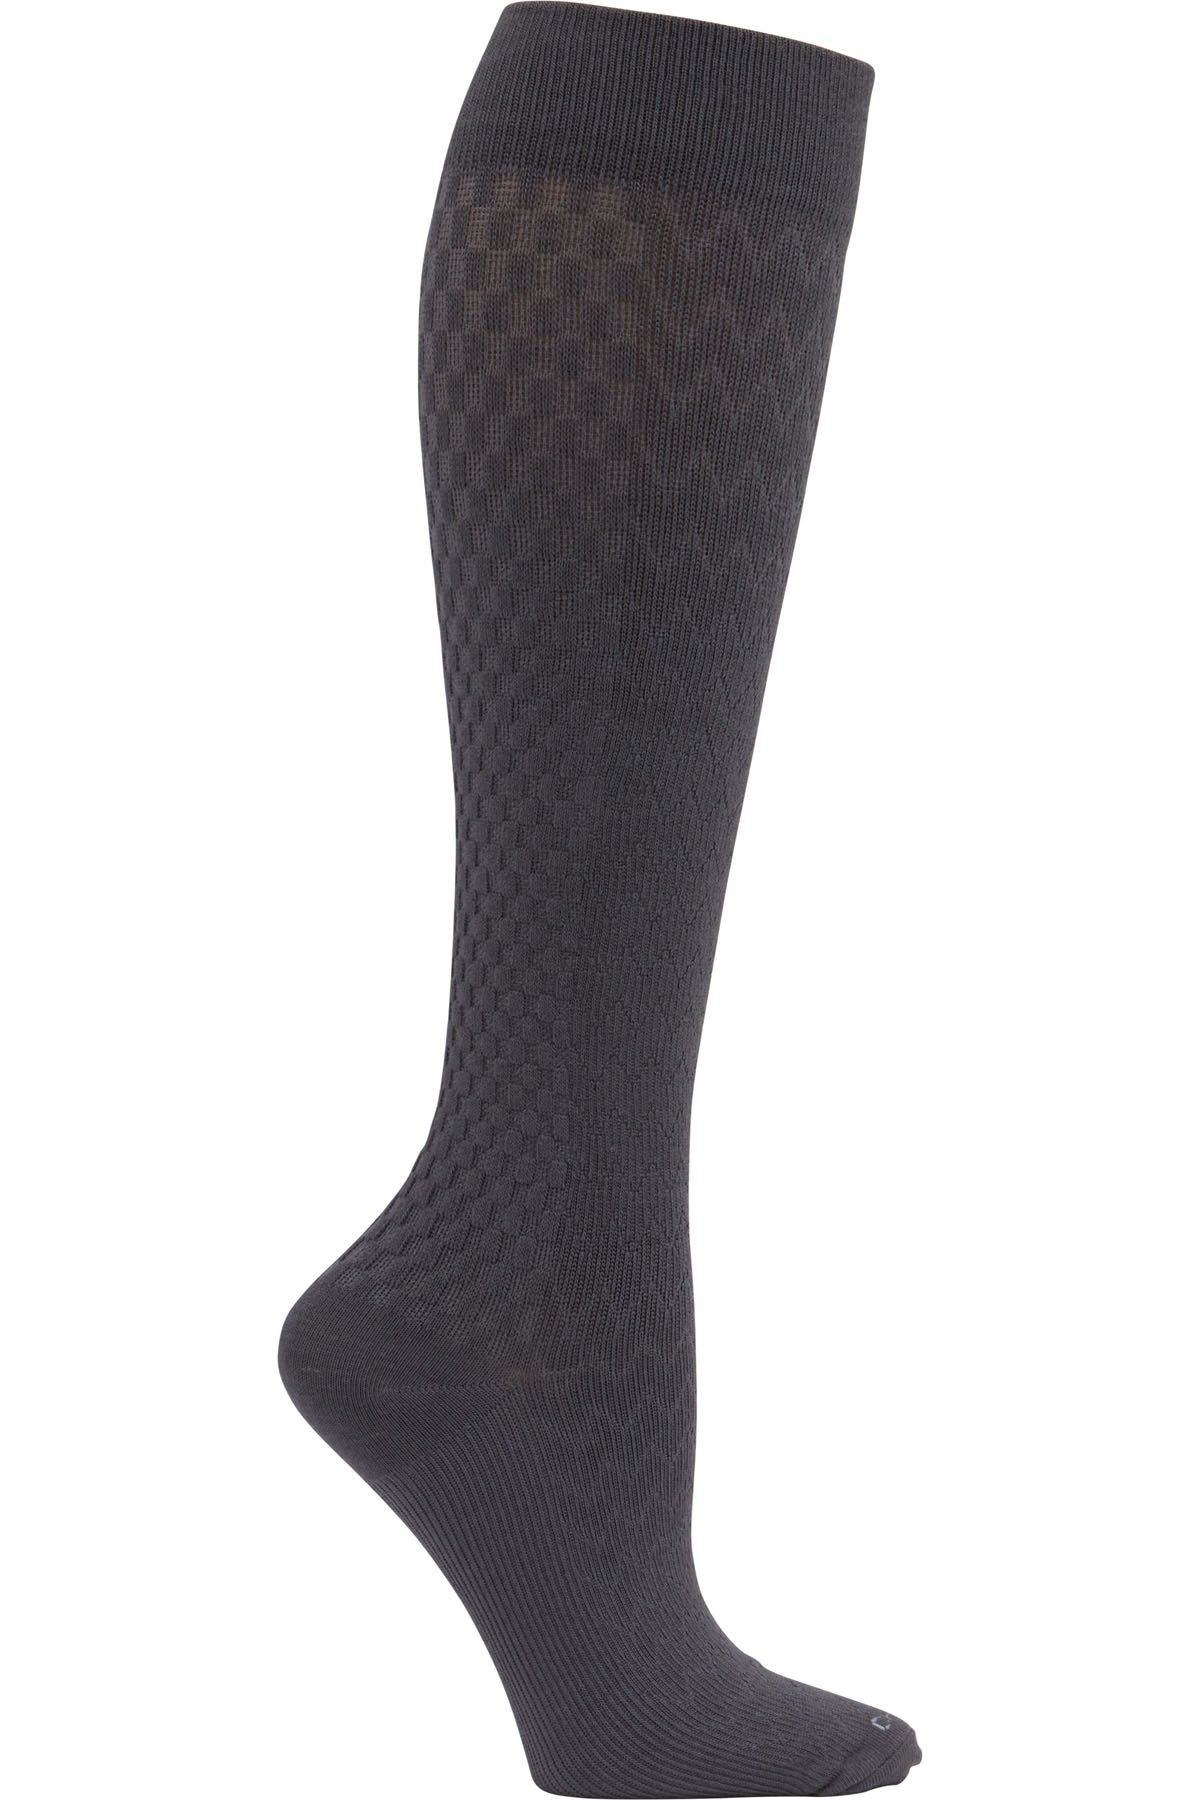 Cherokee Plus Size Mild Compression Wide Calf Socks True Support 10-15 mmHg in Graphite at Parker's Clothing and Shoes.